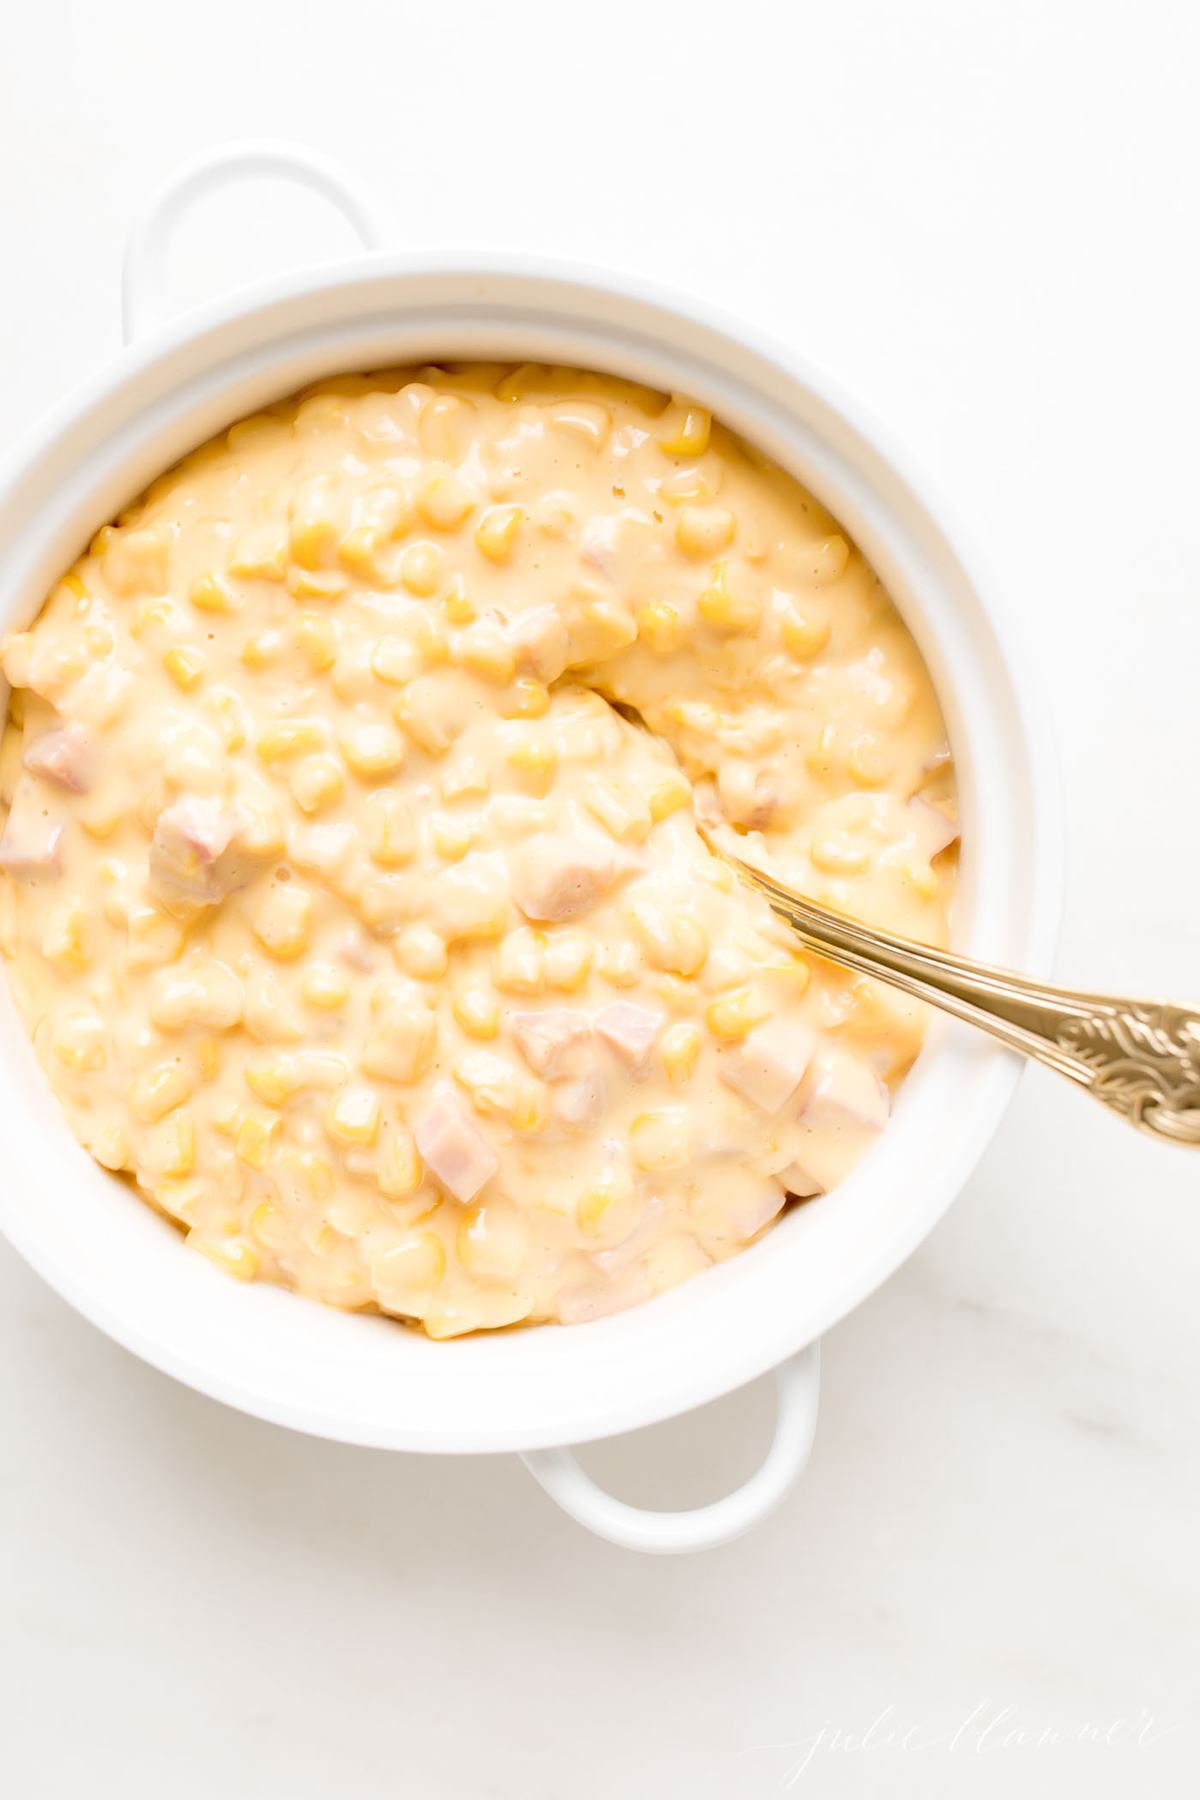 A white casserole dish filled with Cheesy Corn Casserole, a gold serving spoon in the center.